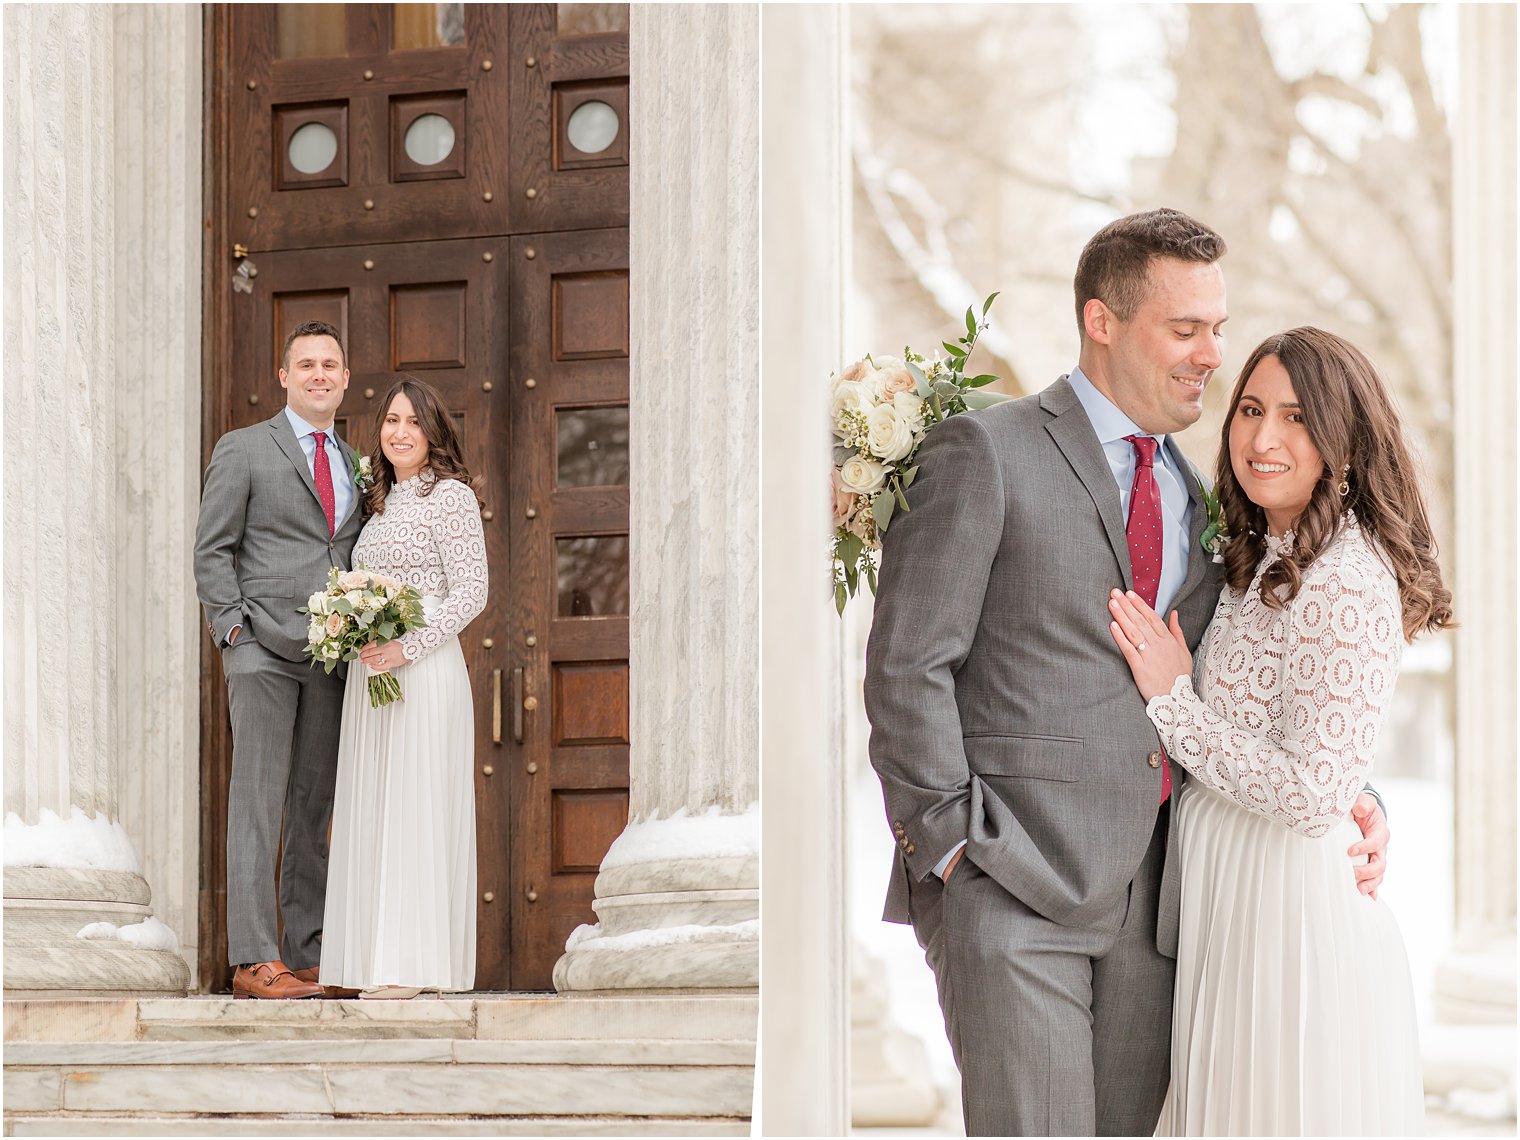 New Jersey wedding portraits at Princeton University in the snow